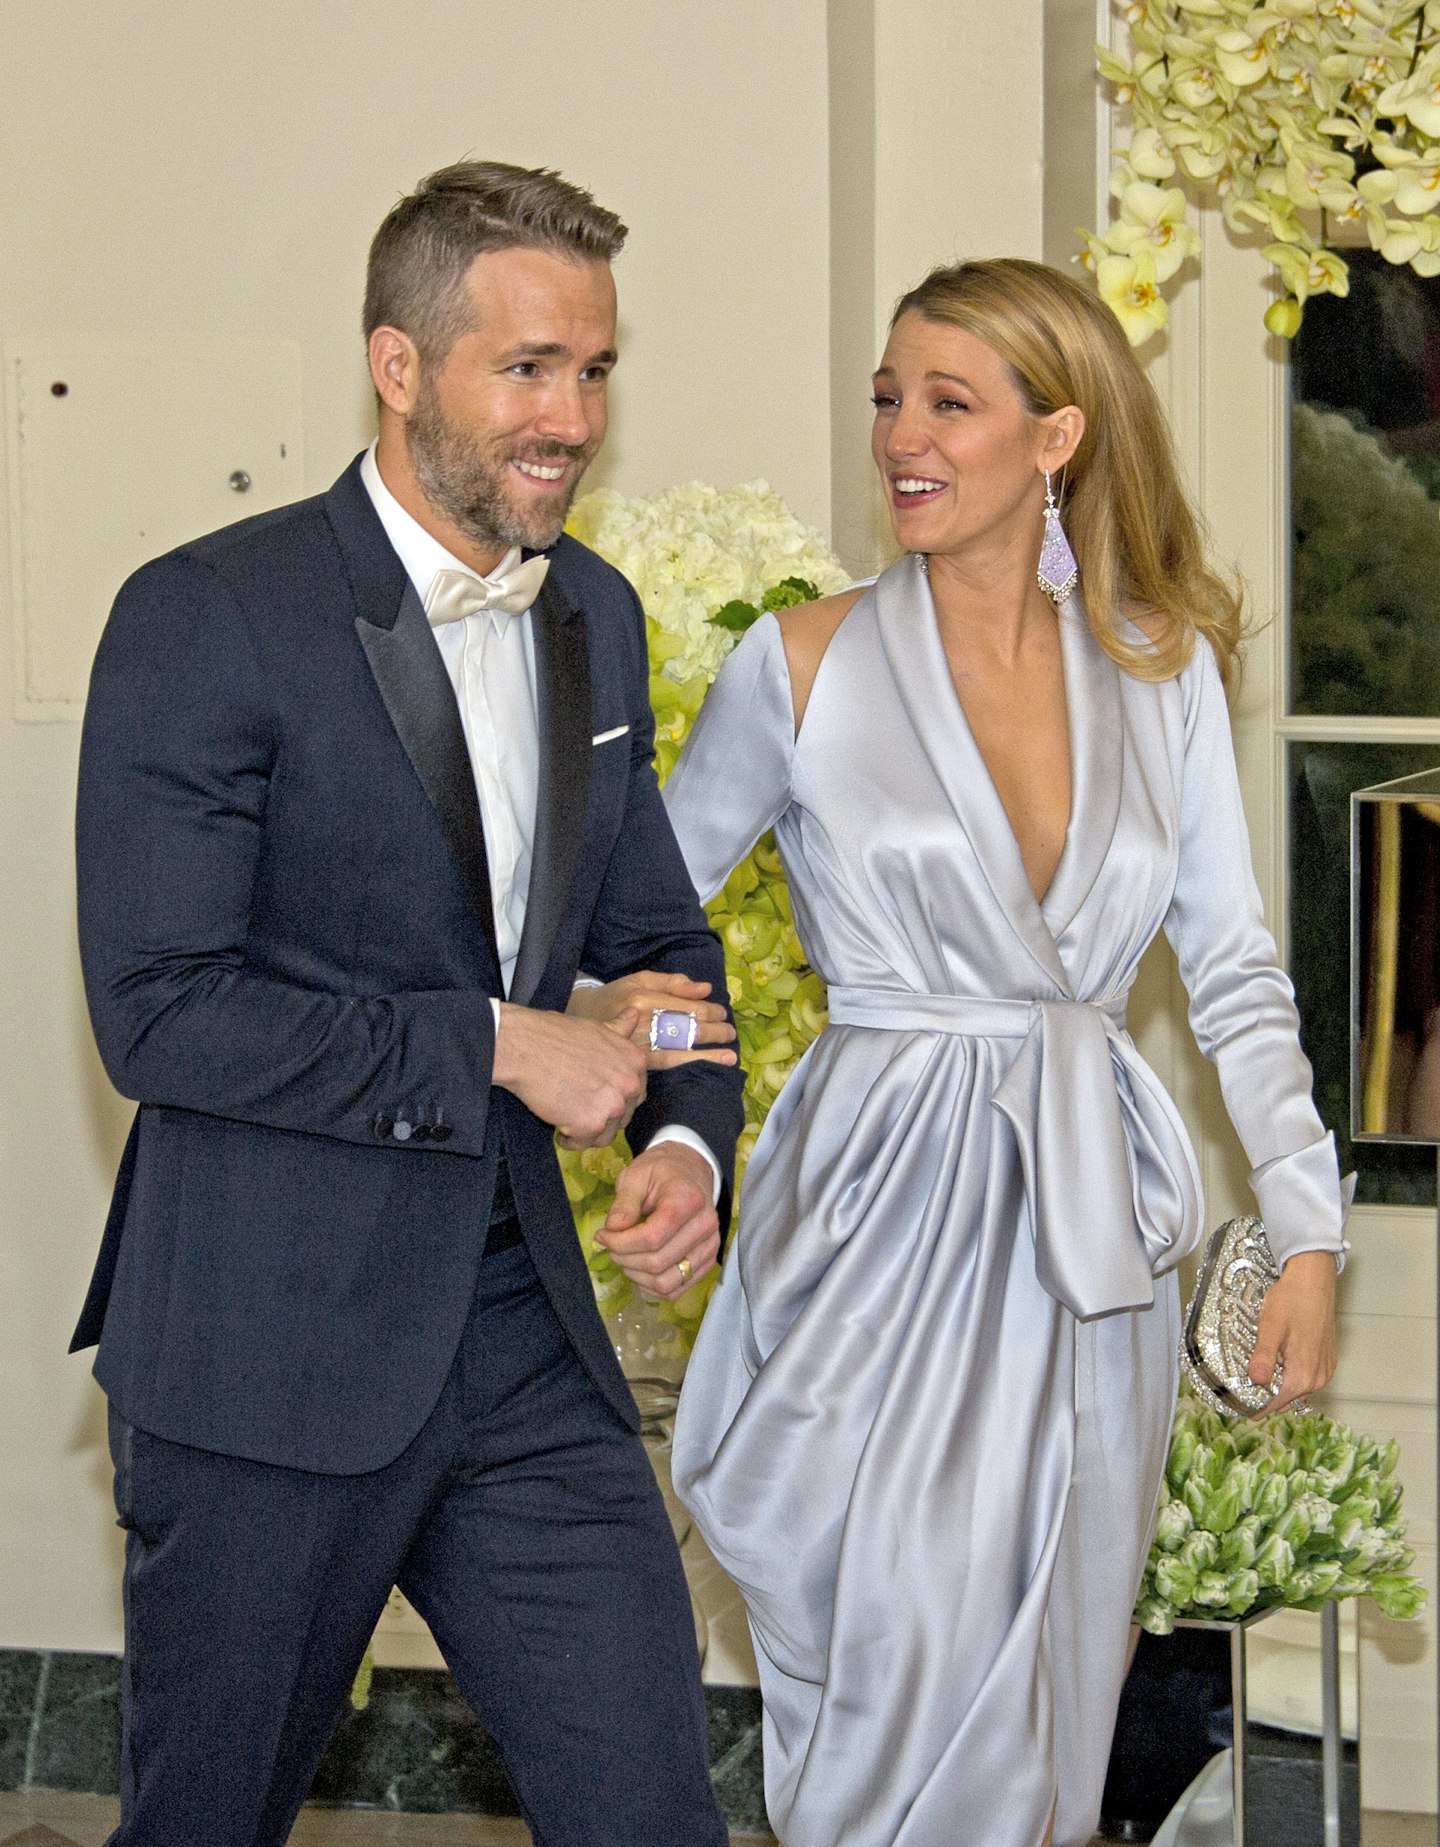 Ryan Reynolds and Blake Lively arrive for the State Dinner in honor of Prime Minister Trudeau and Mrs. Sophie Trudeau of Canada at the White House March 10, 2016 in Washington, DC.